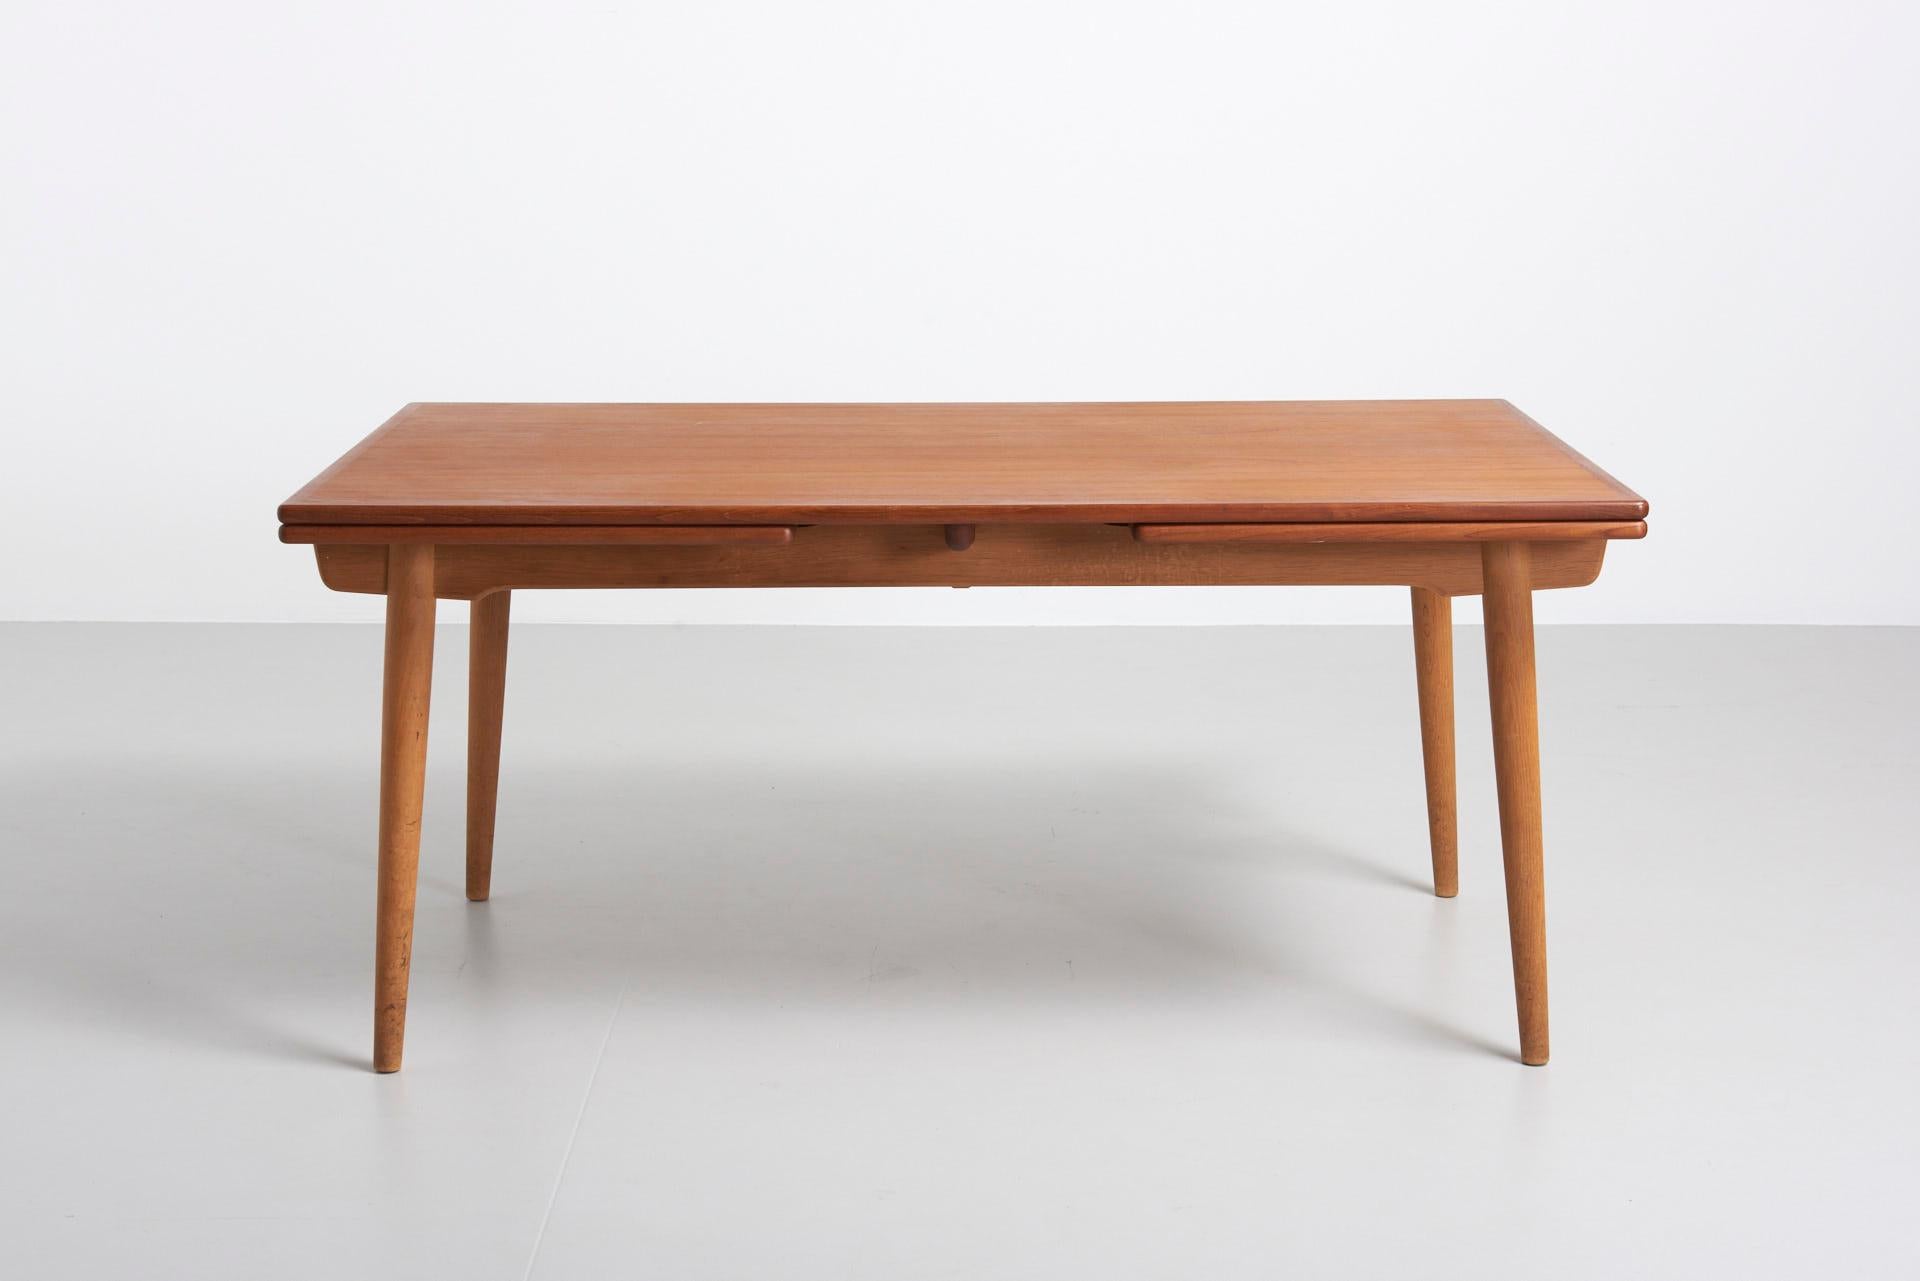 A rare large edition of model AT 312. A dining table designed by Hans J. Wegner, produced by Andreas Tuck in Denmark. Features 2 extension leaves of 60cm each. Legs in solid oak, table top in teak. In perfect condition.